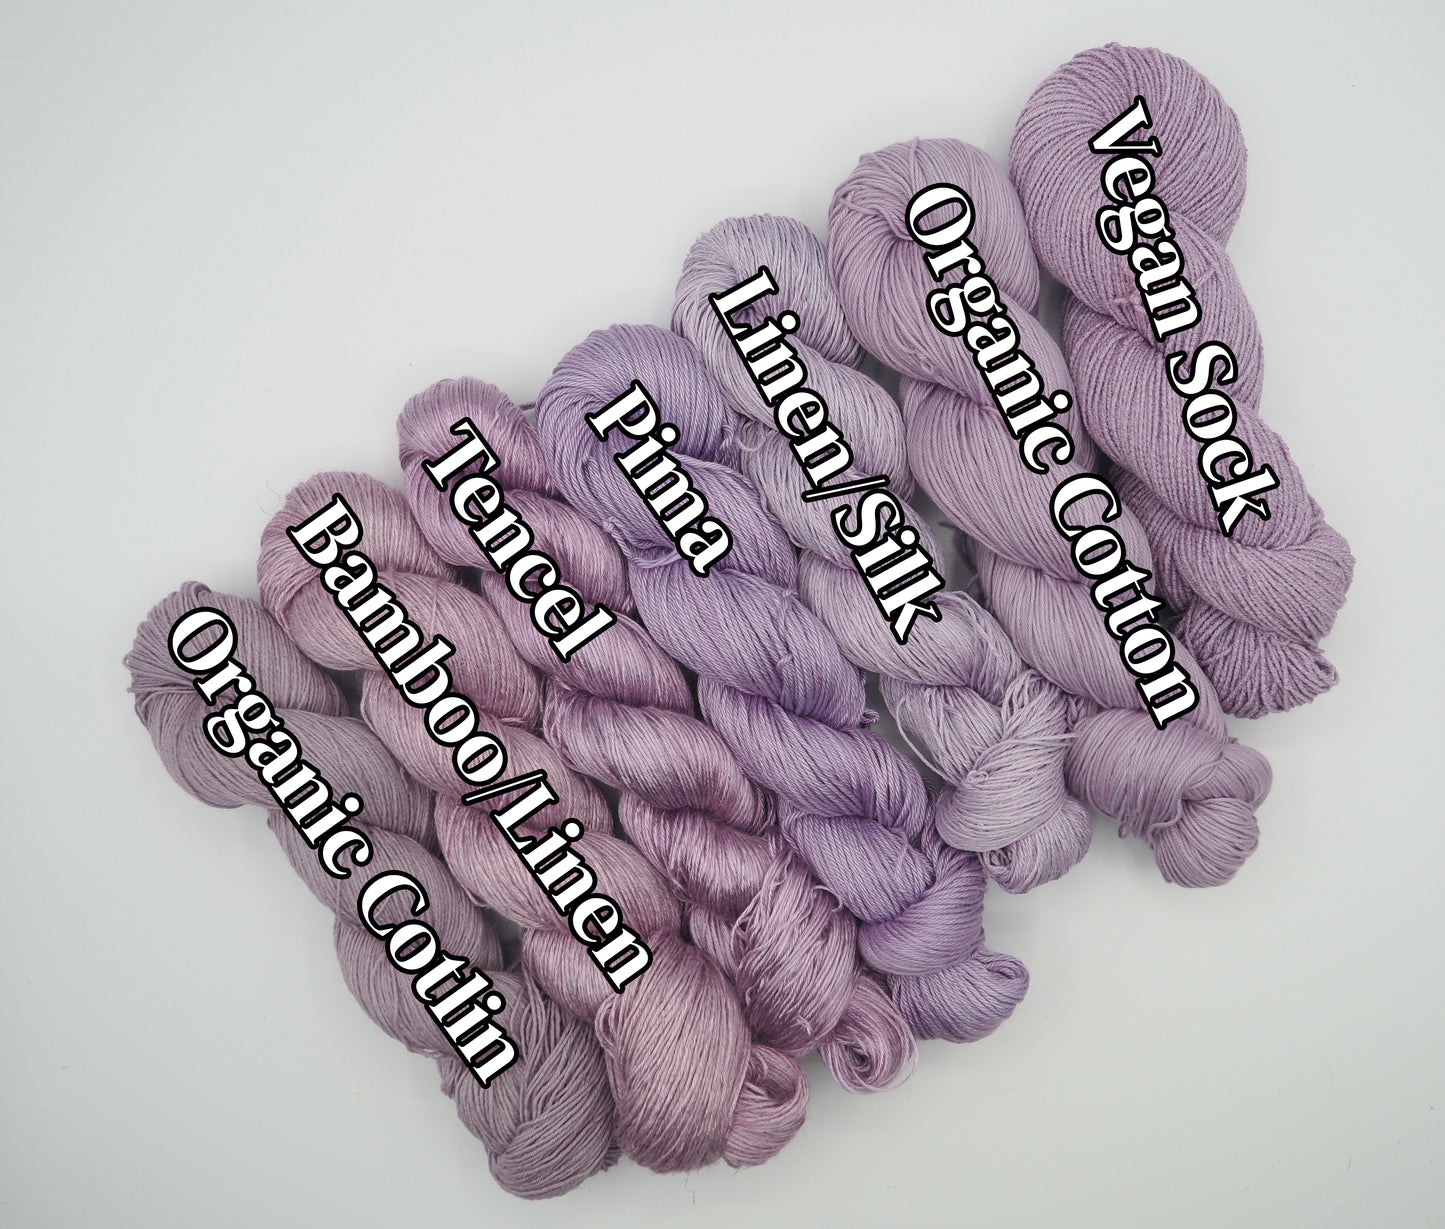 Spring Half Skeins (50g) - dyed to order please allow 3-4 weeks for dyeing